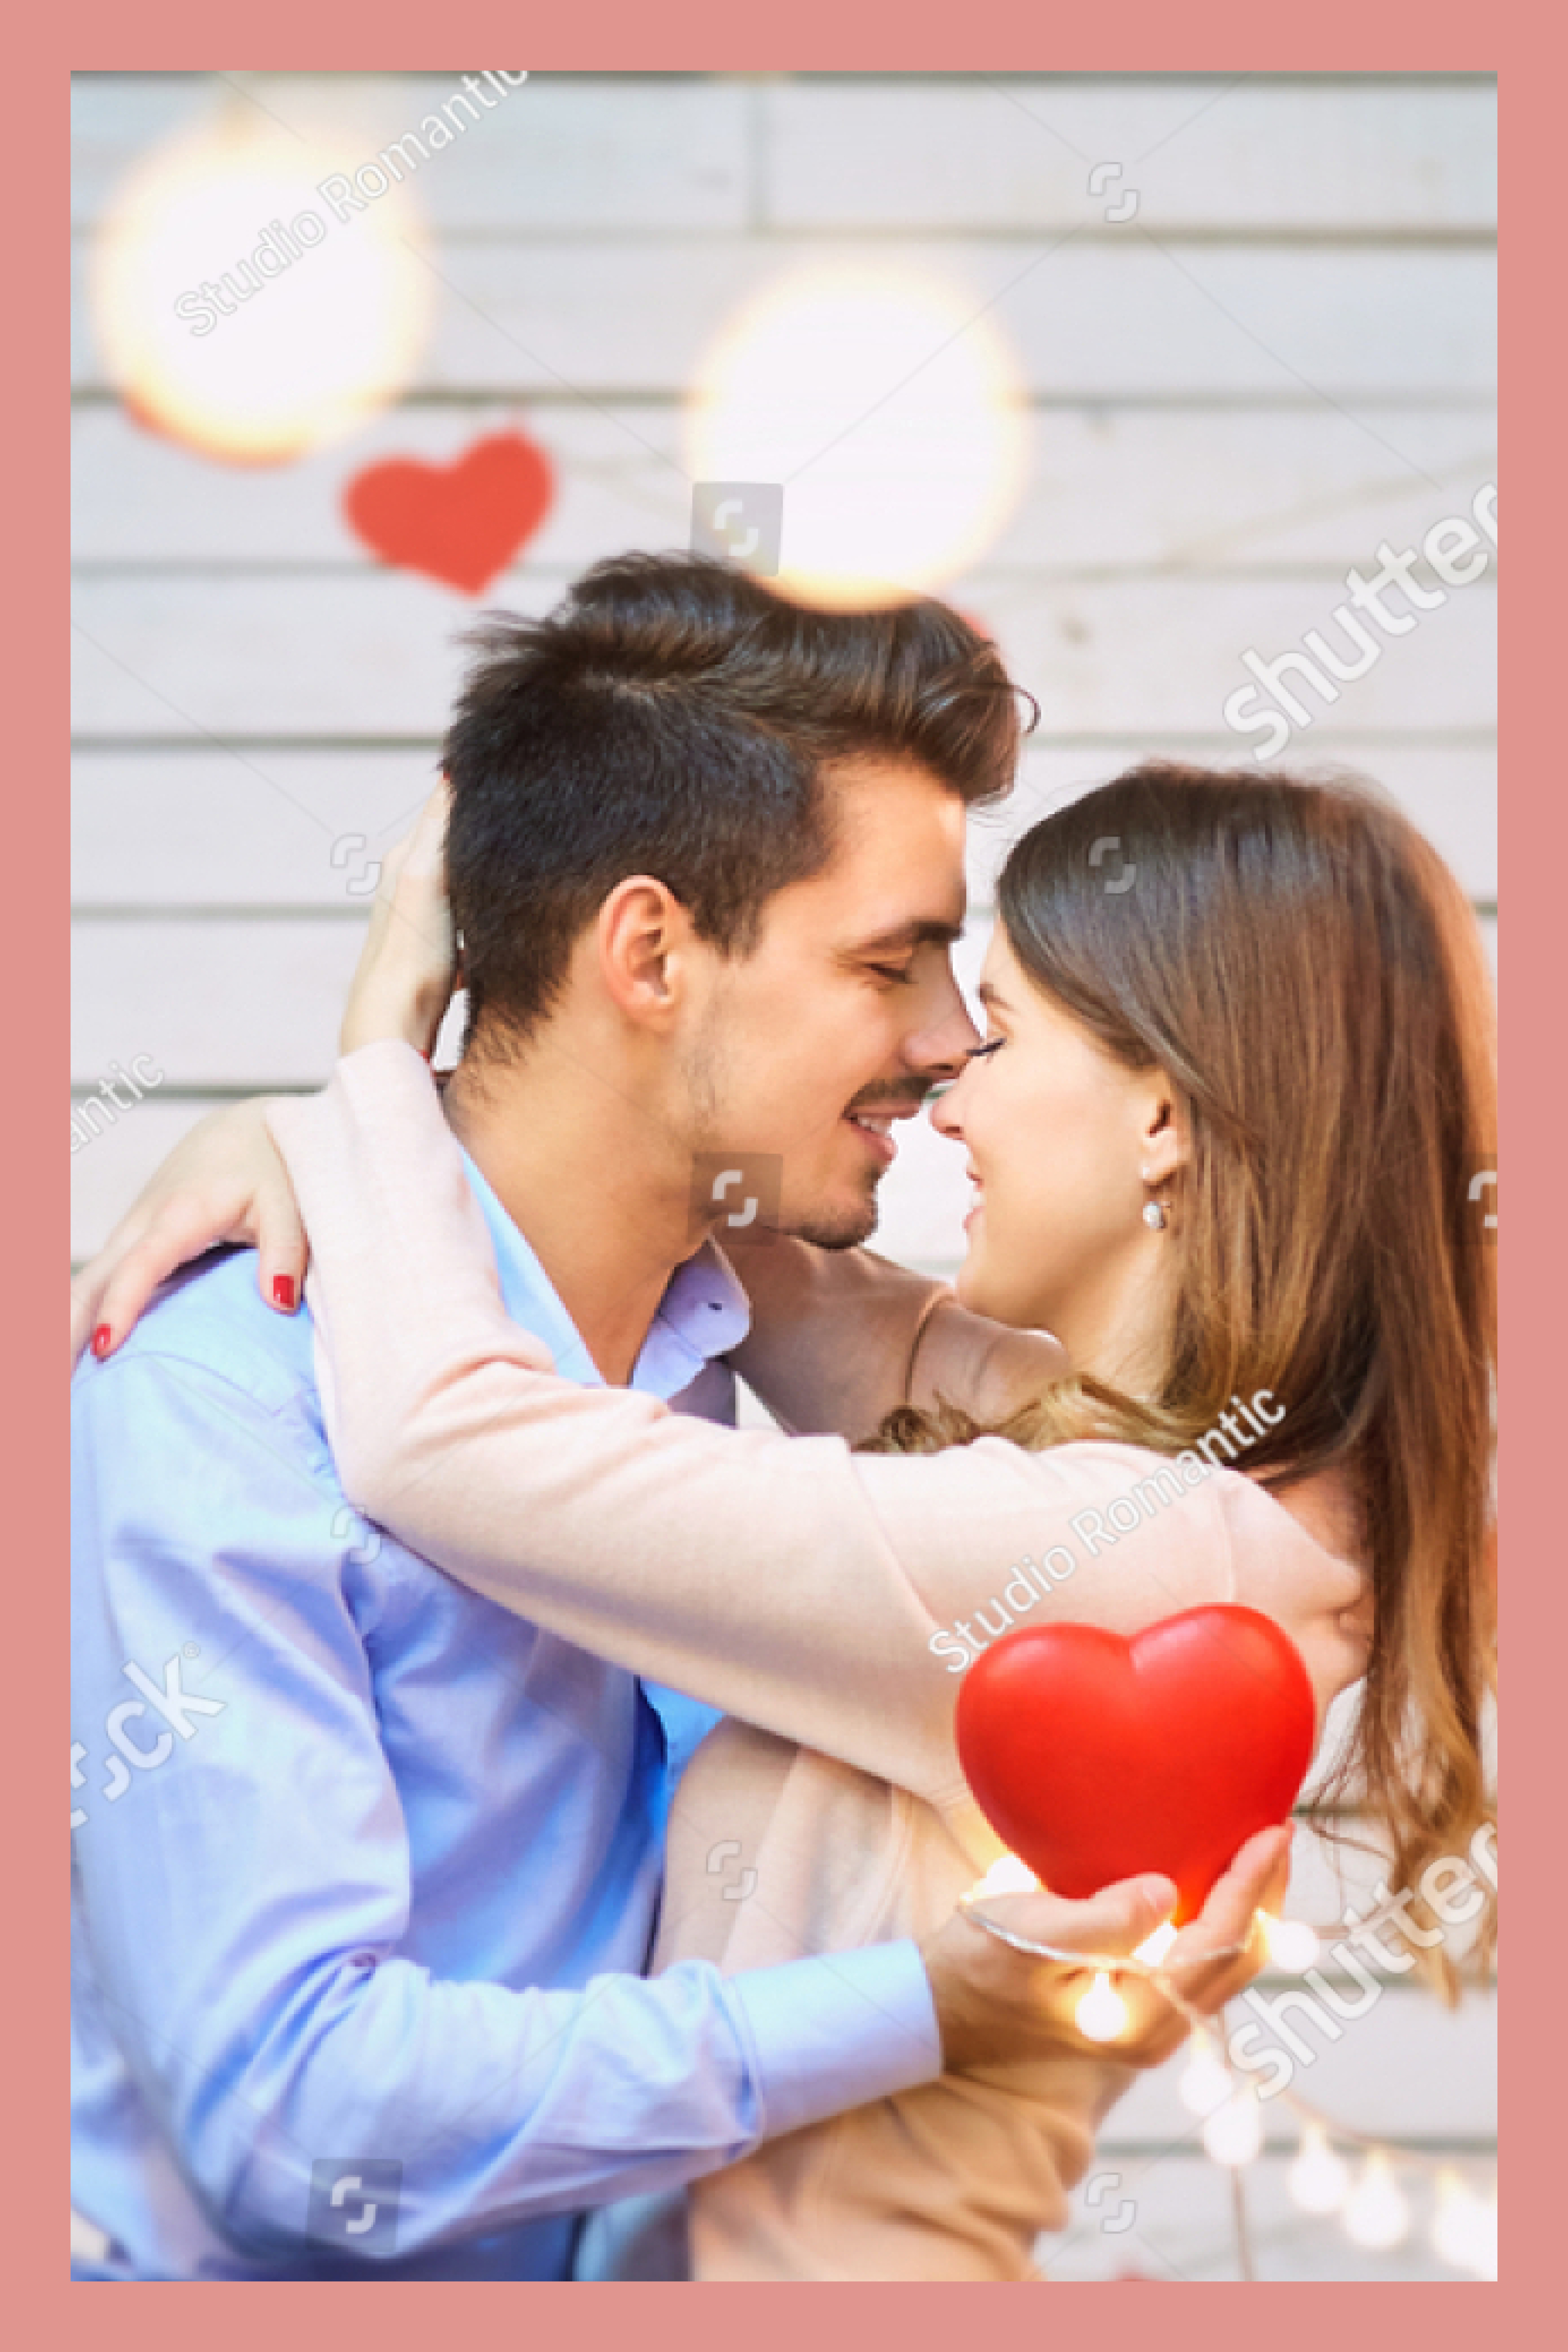 Couple in love hugging and holding a red heart.